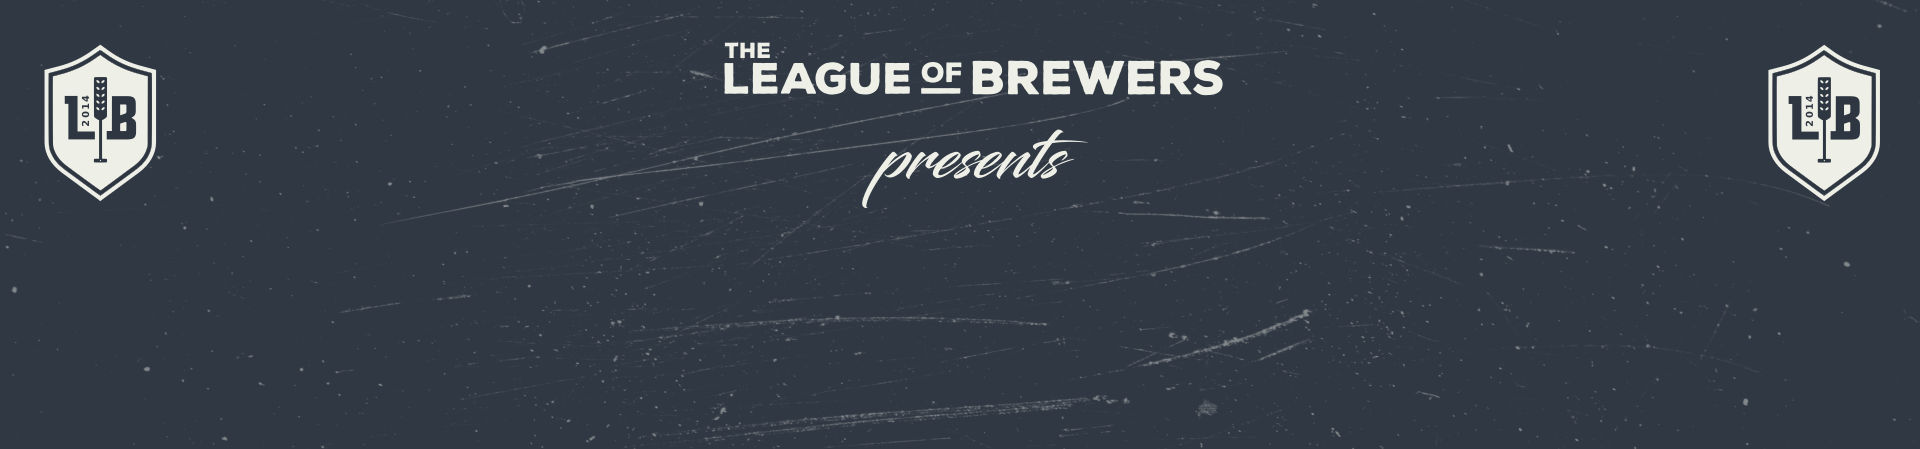 League of Brewers presents: Fork Brewcorp